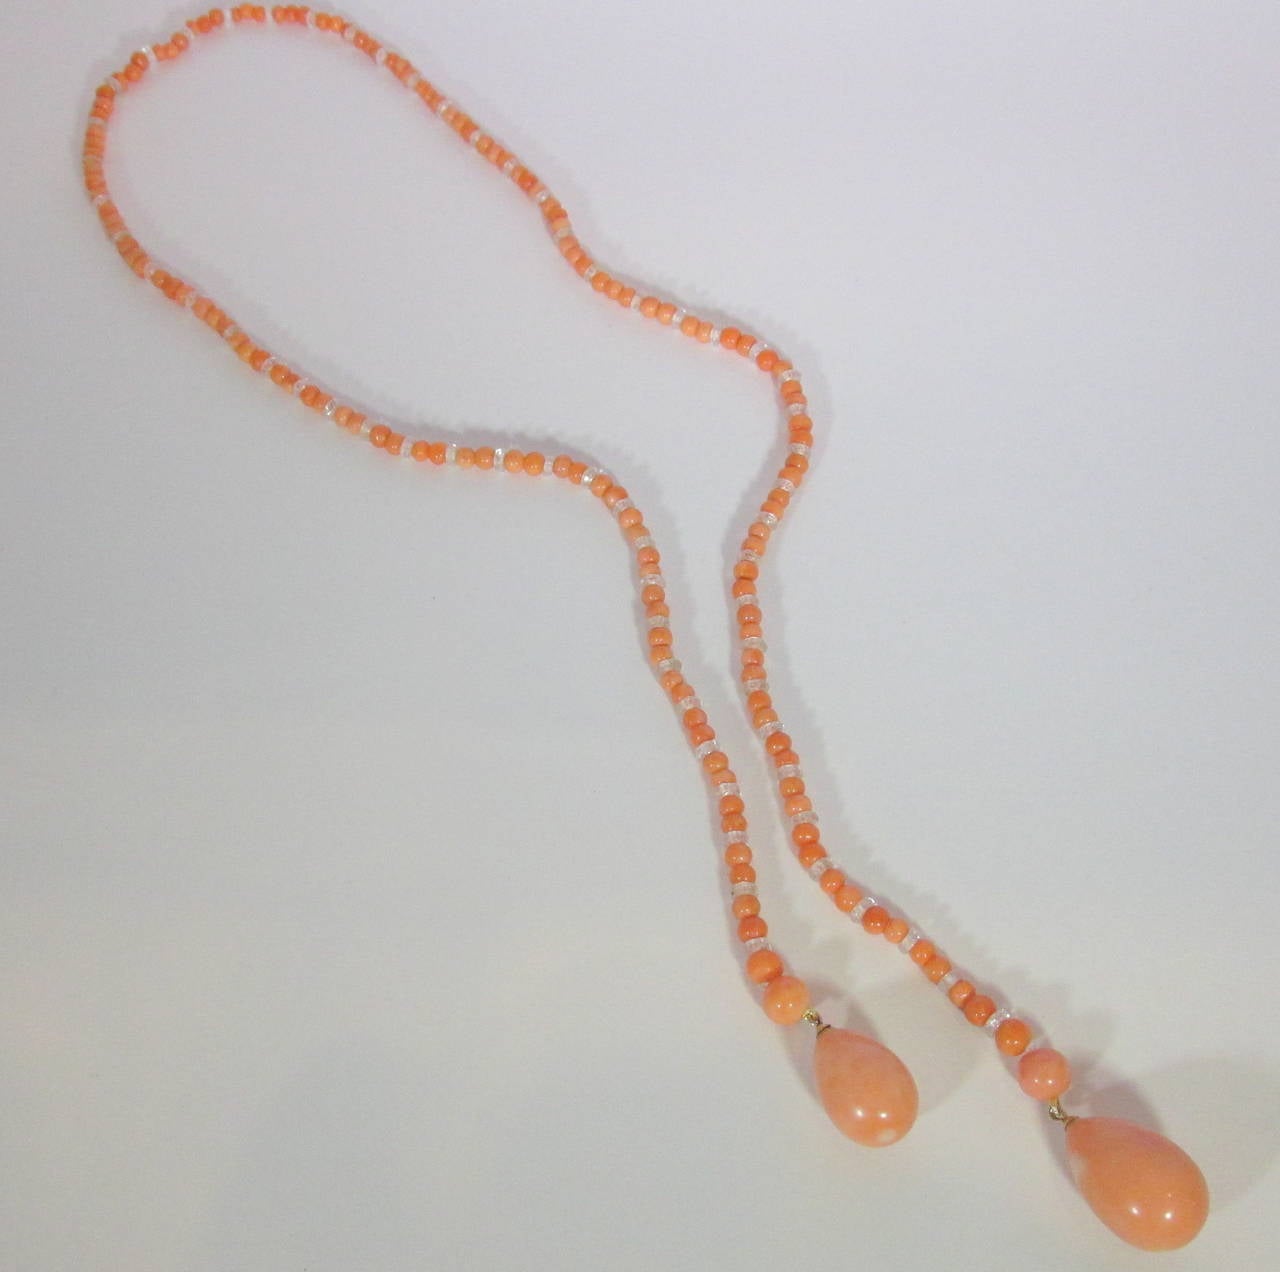 Untreated coral ( approx. 100 cts.) which is accented with faceted rock crystal 24.5 inches long sautoir terminating with pear shaped coral beads. The largest drop measures 20mm. by 13.5mm, and the smaller, 18 mm. by 12 mm.  This piece is worn by